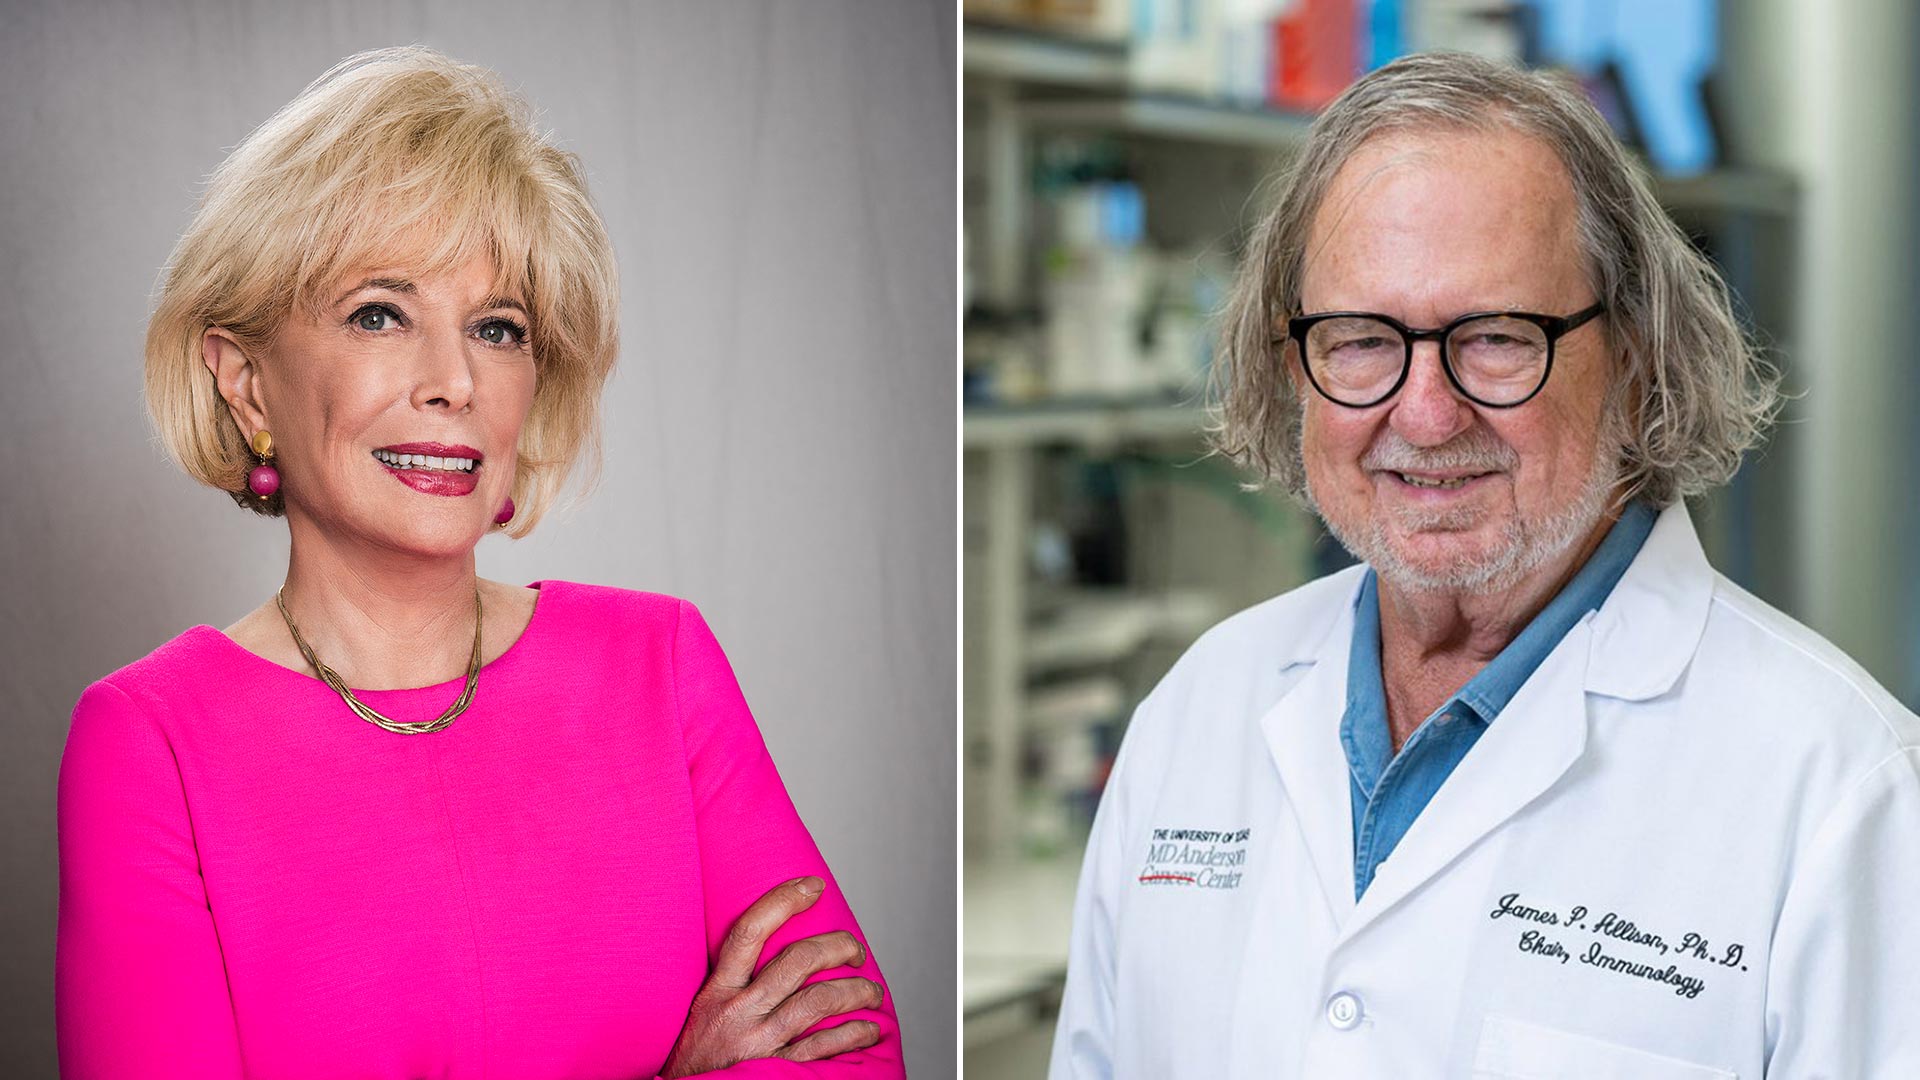 In Conversation with Lesley Stahl: James P. Allison Examines the City of Science